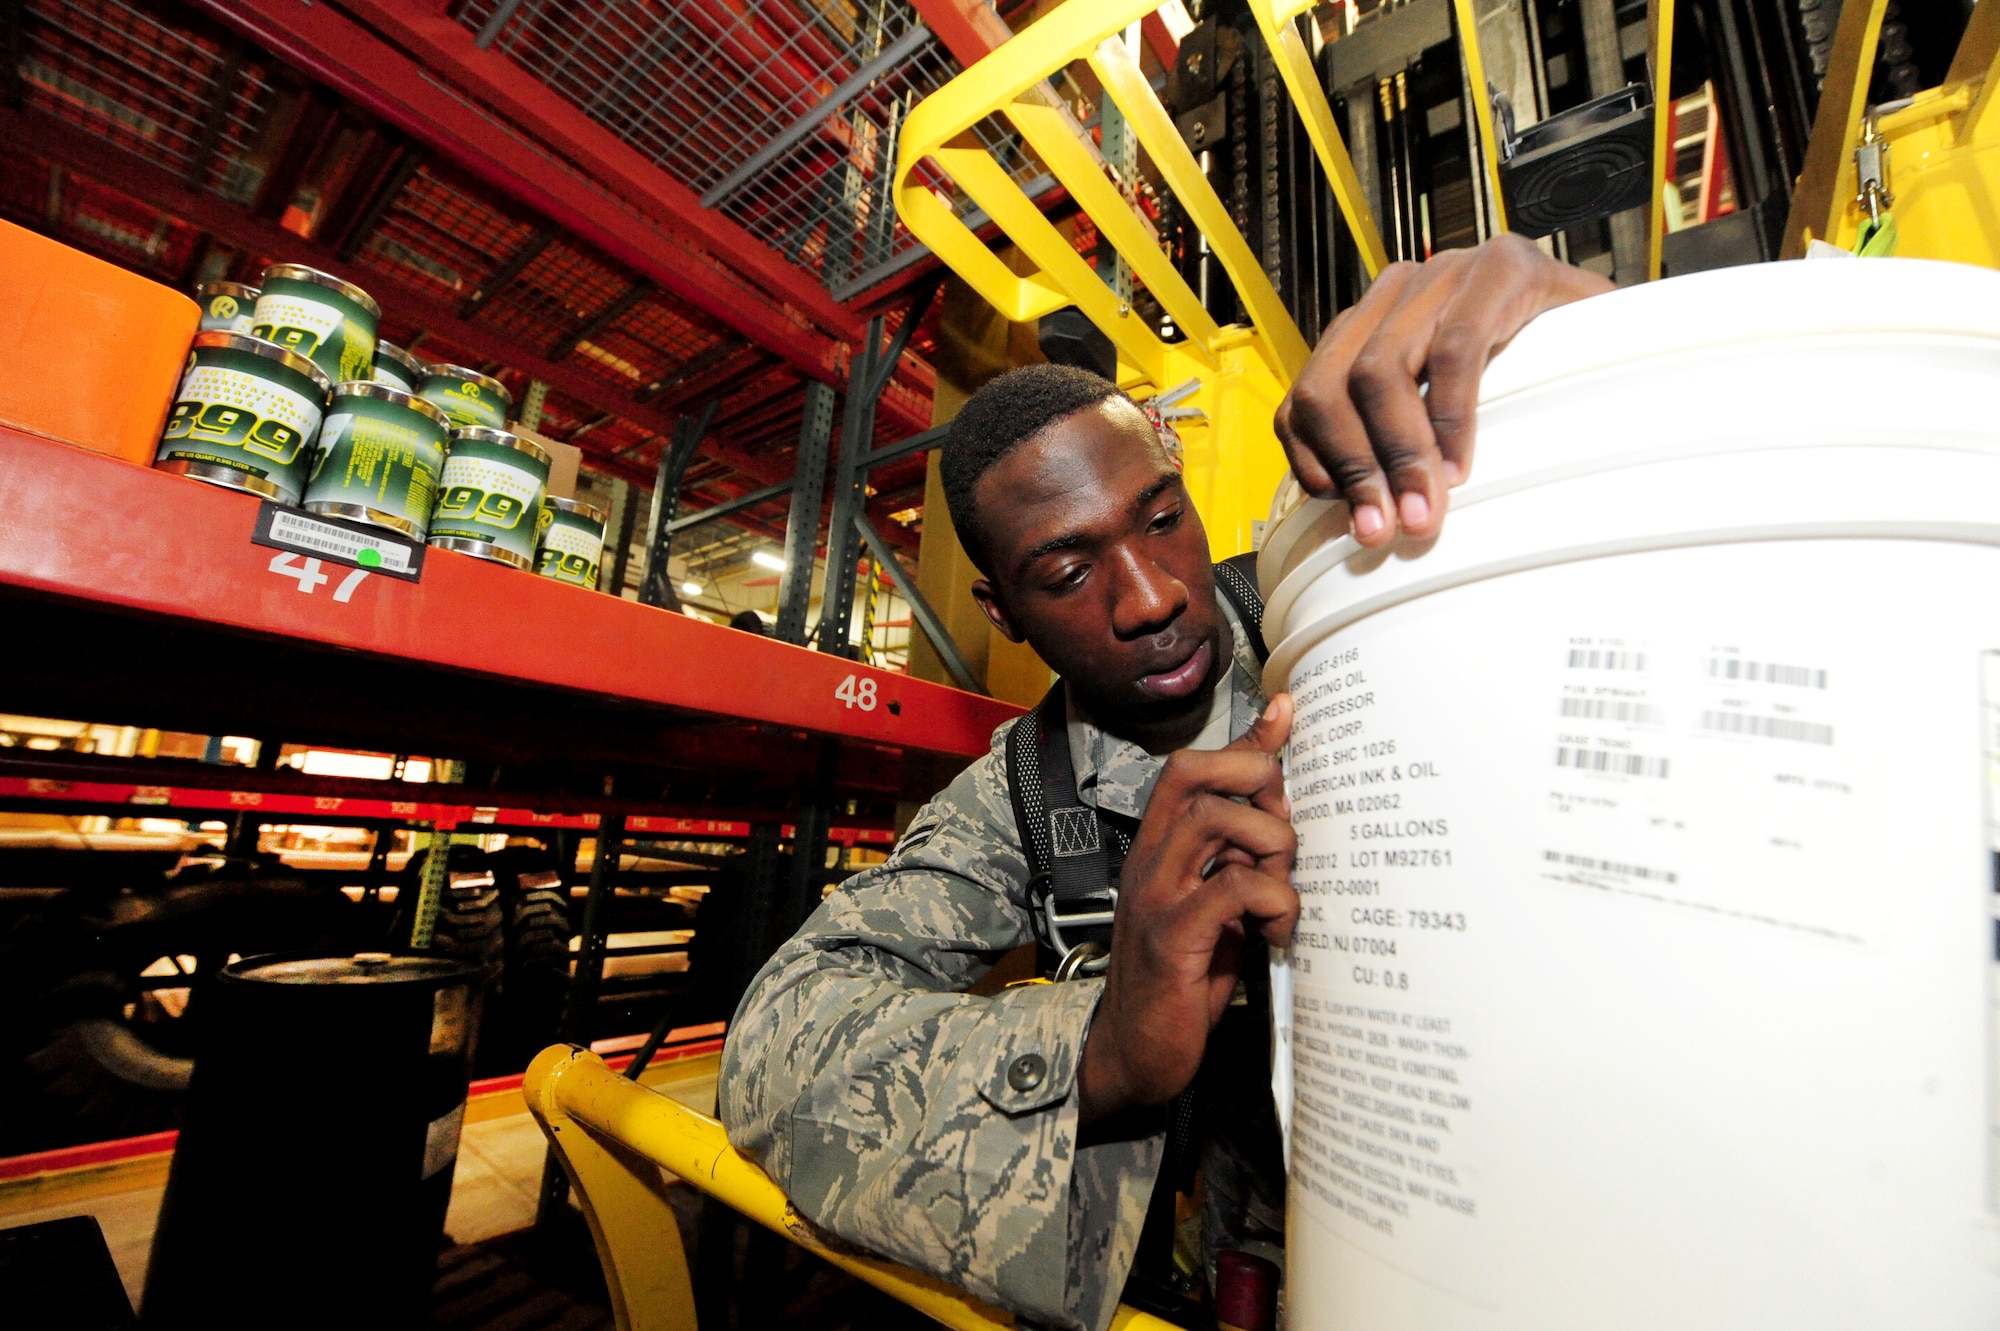 Airman 1st Class Terrell Grant, 509th Logistics Readiness Squadron central storage journeyman, double-checks the stock number of an item before putting it away at the central storage warehouse at Whiteman Air Force Base, Mo., June 25, 2013. Checking stock numbers helps Grant keep accountability of warehouse items. (U.S. Air Force photo by Staff Sgt. Nick Wilson/Released)